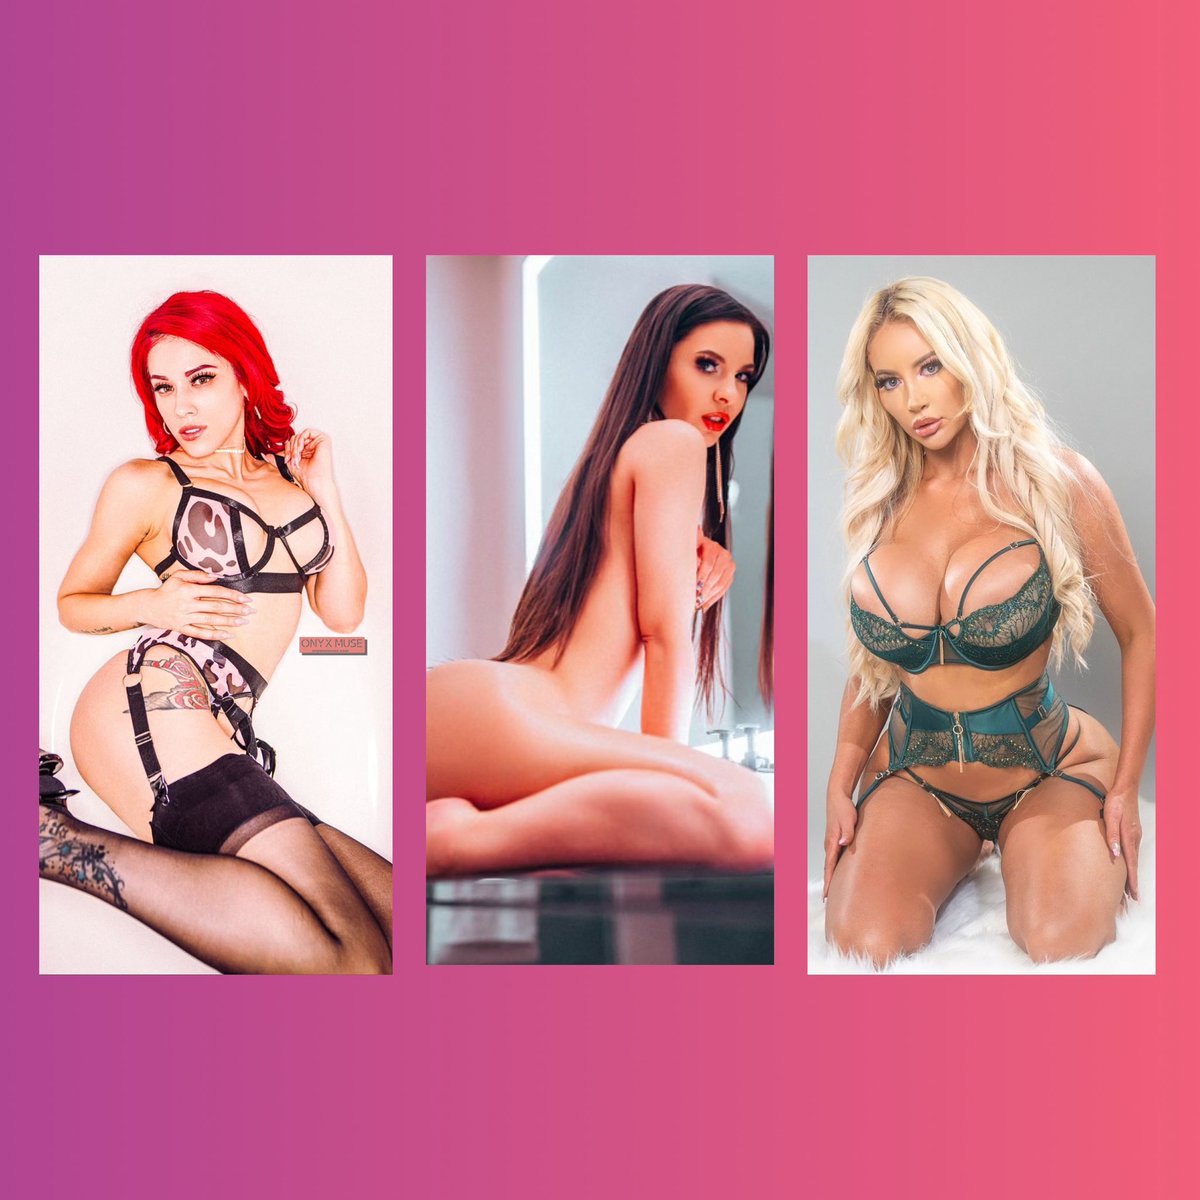 3 Queen Stream 👑👑👑 Going LIVE with these beautiful ladies @MilanaRicciXXX & @Nicolette_Shea 💗 Tonight 7pm PST 💎 on our sneaky links 🔗 onyxmuse.com 💋 Don’t miss this one ❤️‍🔥